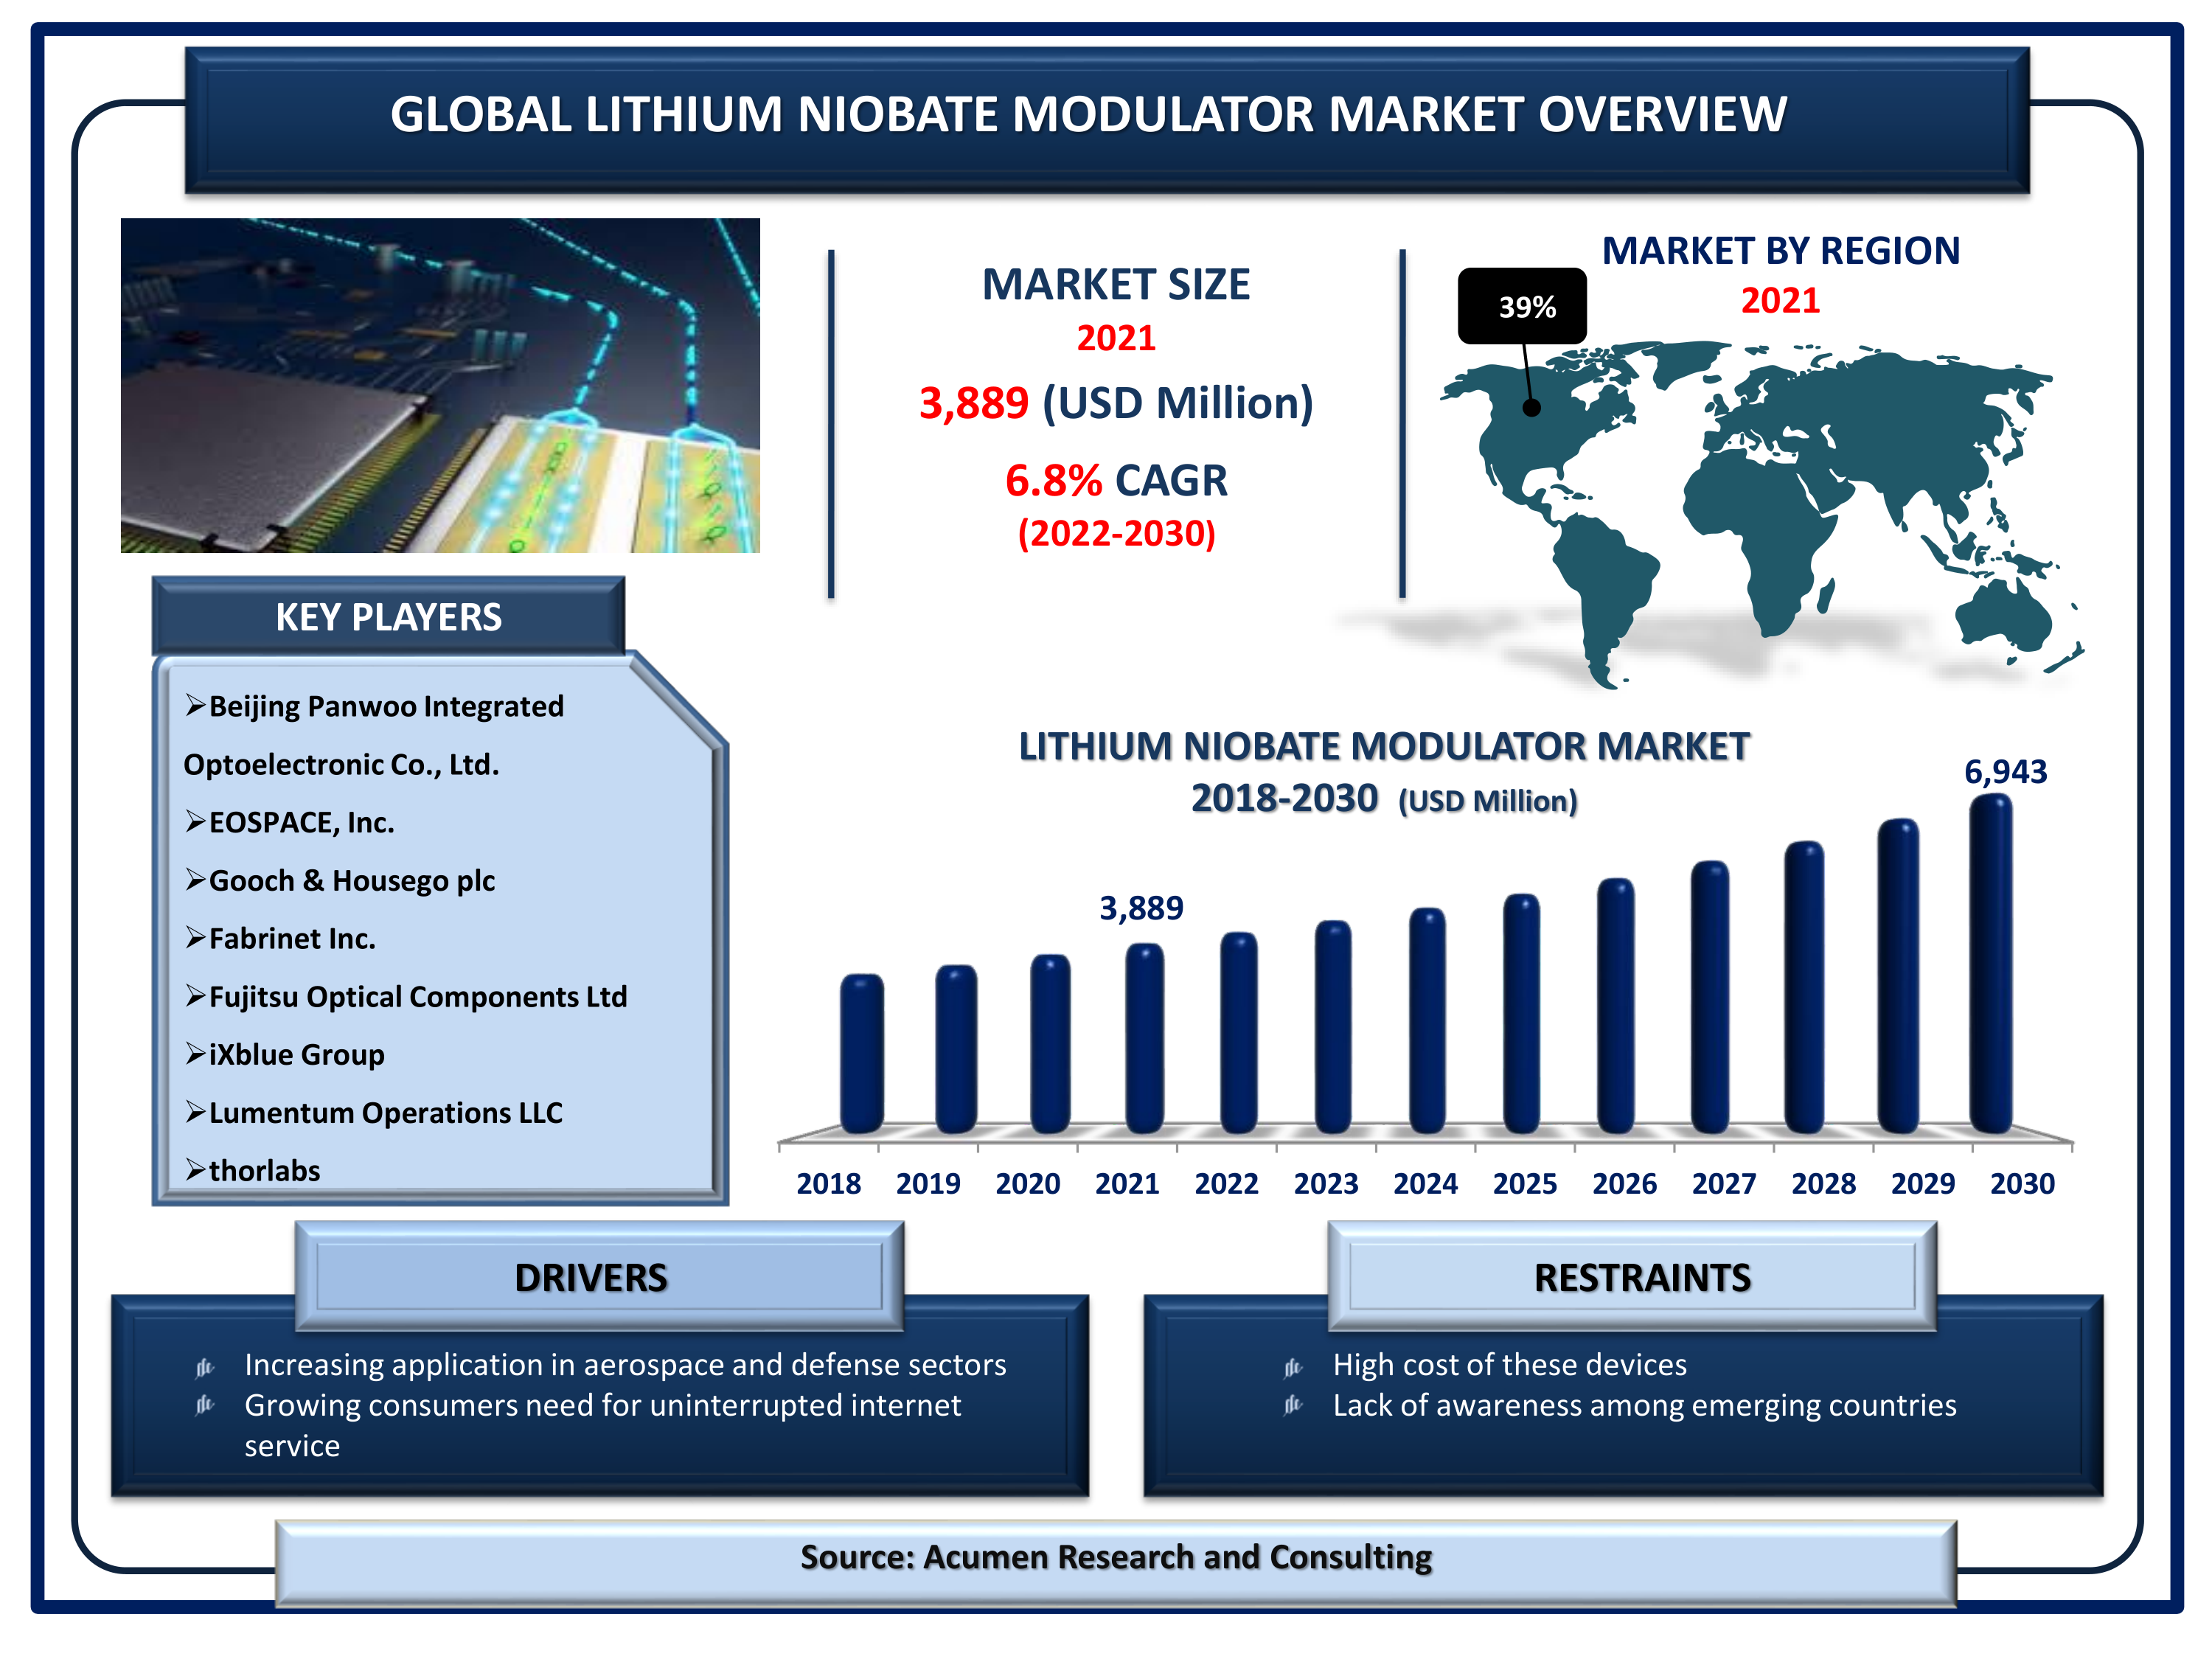 Lithium Niobate Modulator Market is projected to achieve a market size of USD 6,943 Million by 2030 budding at a CAGR of 6.8%